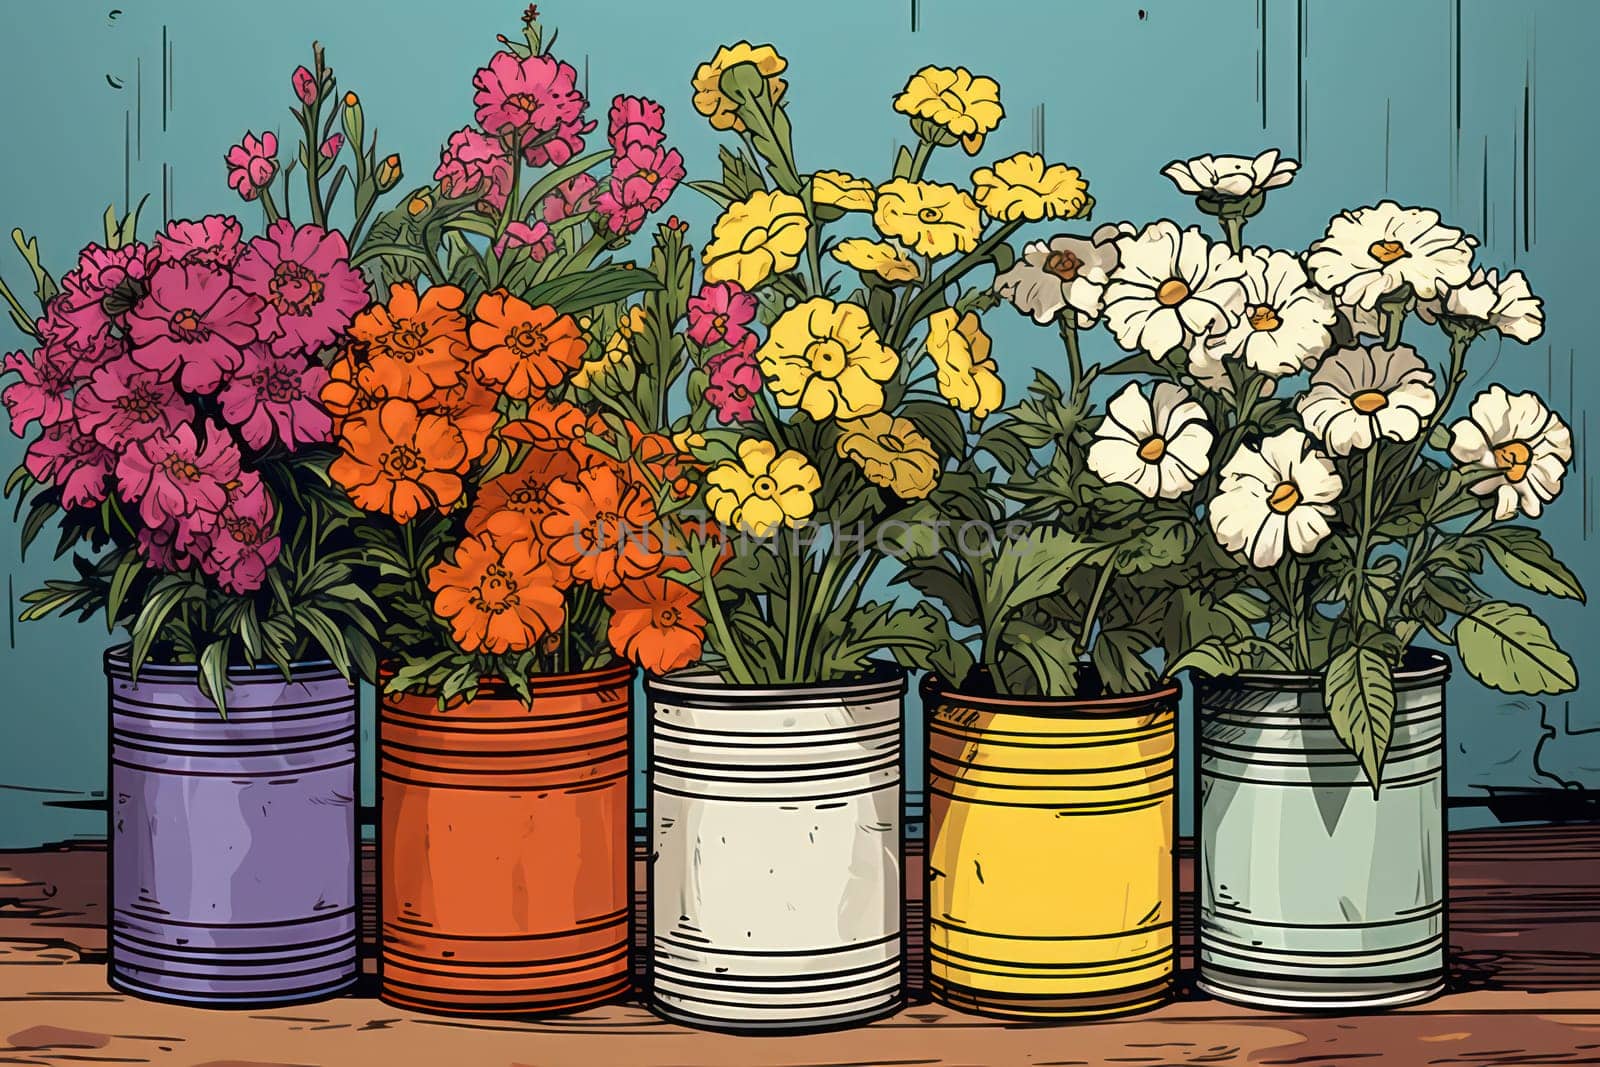 Blooming Beauty: A Colorful Floral Bouquet in a Vintage Wooden Flowerpot, Illustration on a Bright Yellow and Blue Background.